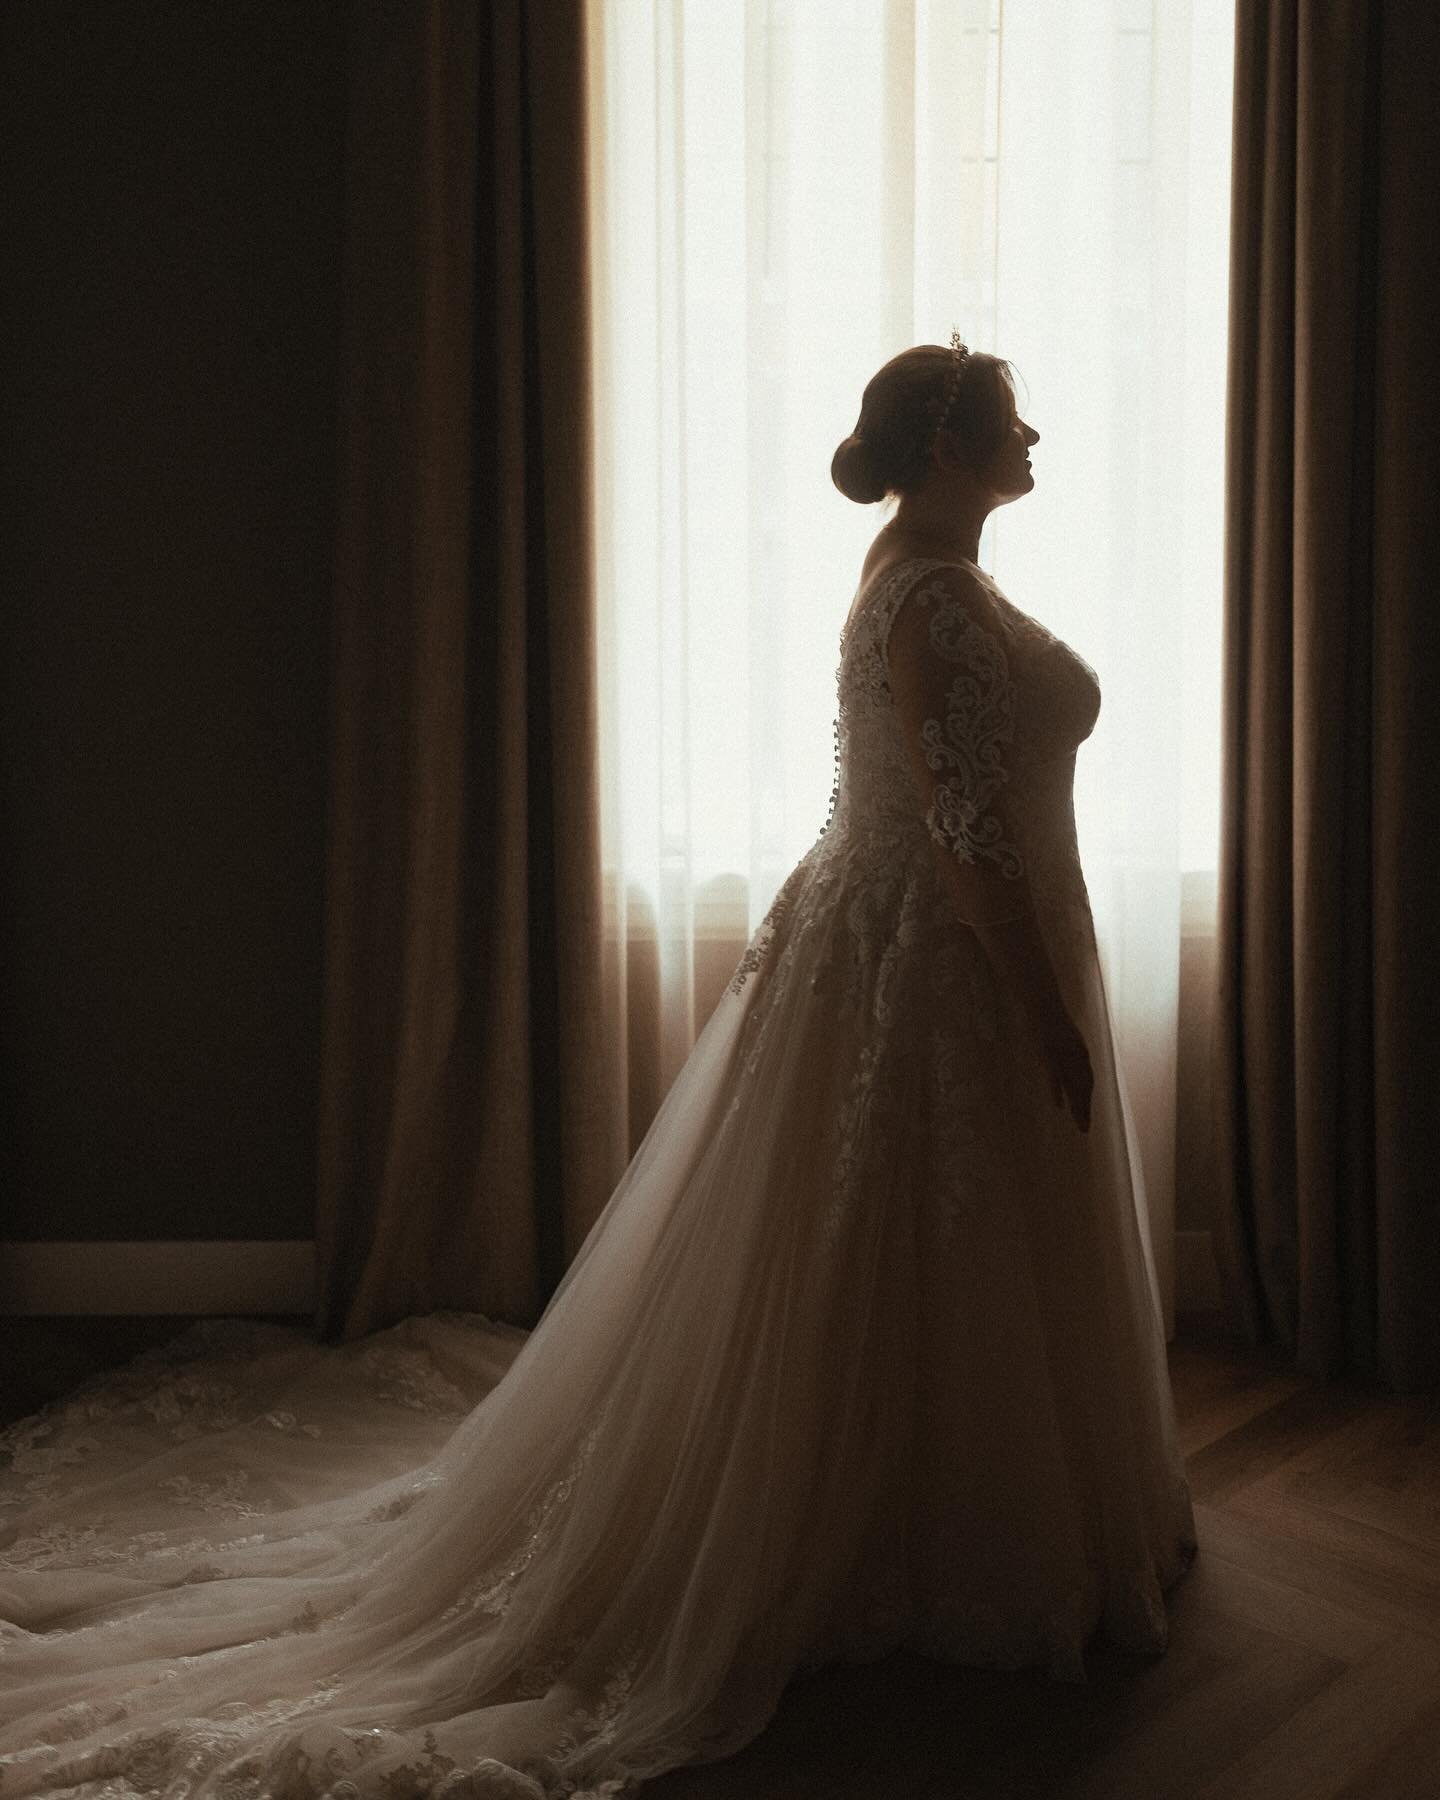 Who says a queen needs a throne when she has a crown and a wedding dress like this? (Hybrid photo and video wedding)
⠀⠀⠀⠀⠀⠀⠀⠀⠀
Captured this breathtaking moment of pure elegance and joy. The way the light plays through the window, casting a gentle ha